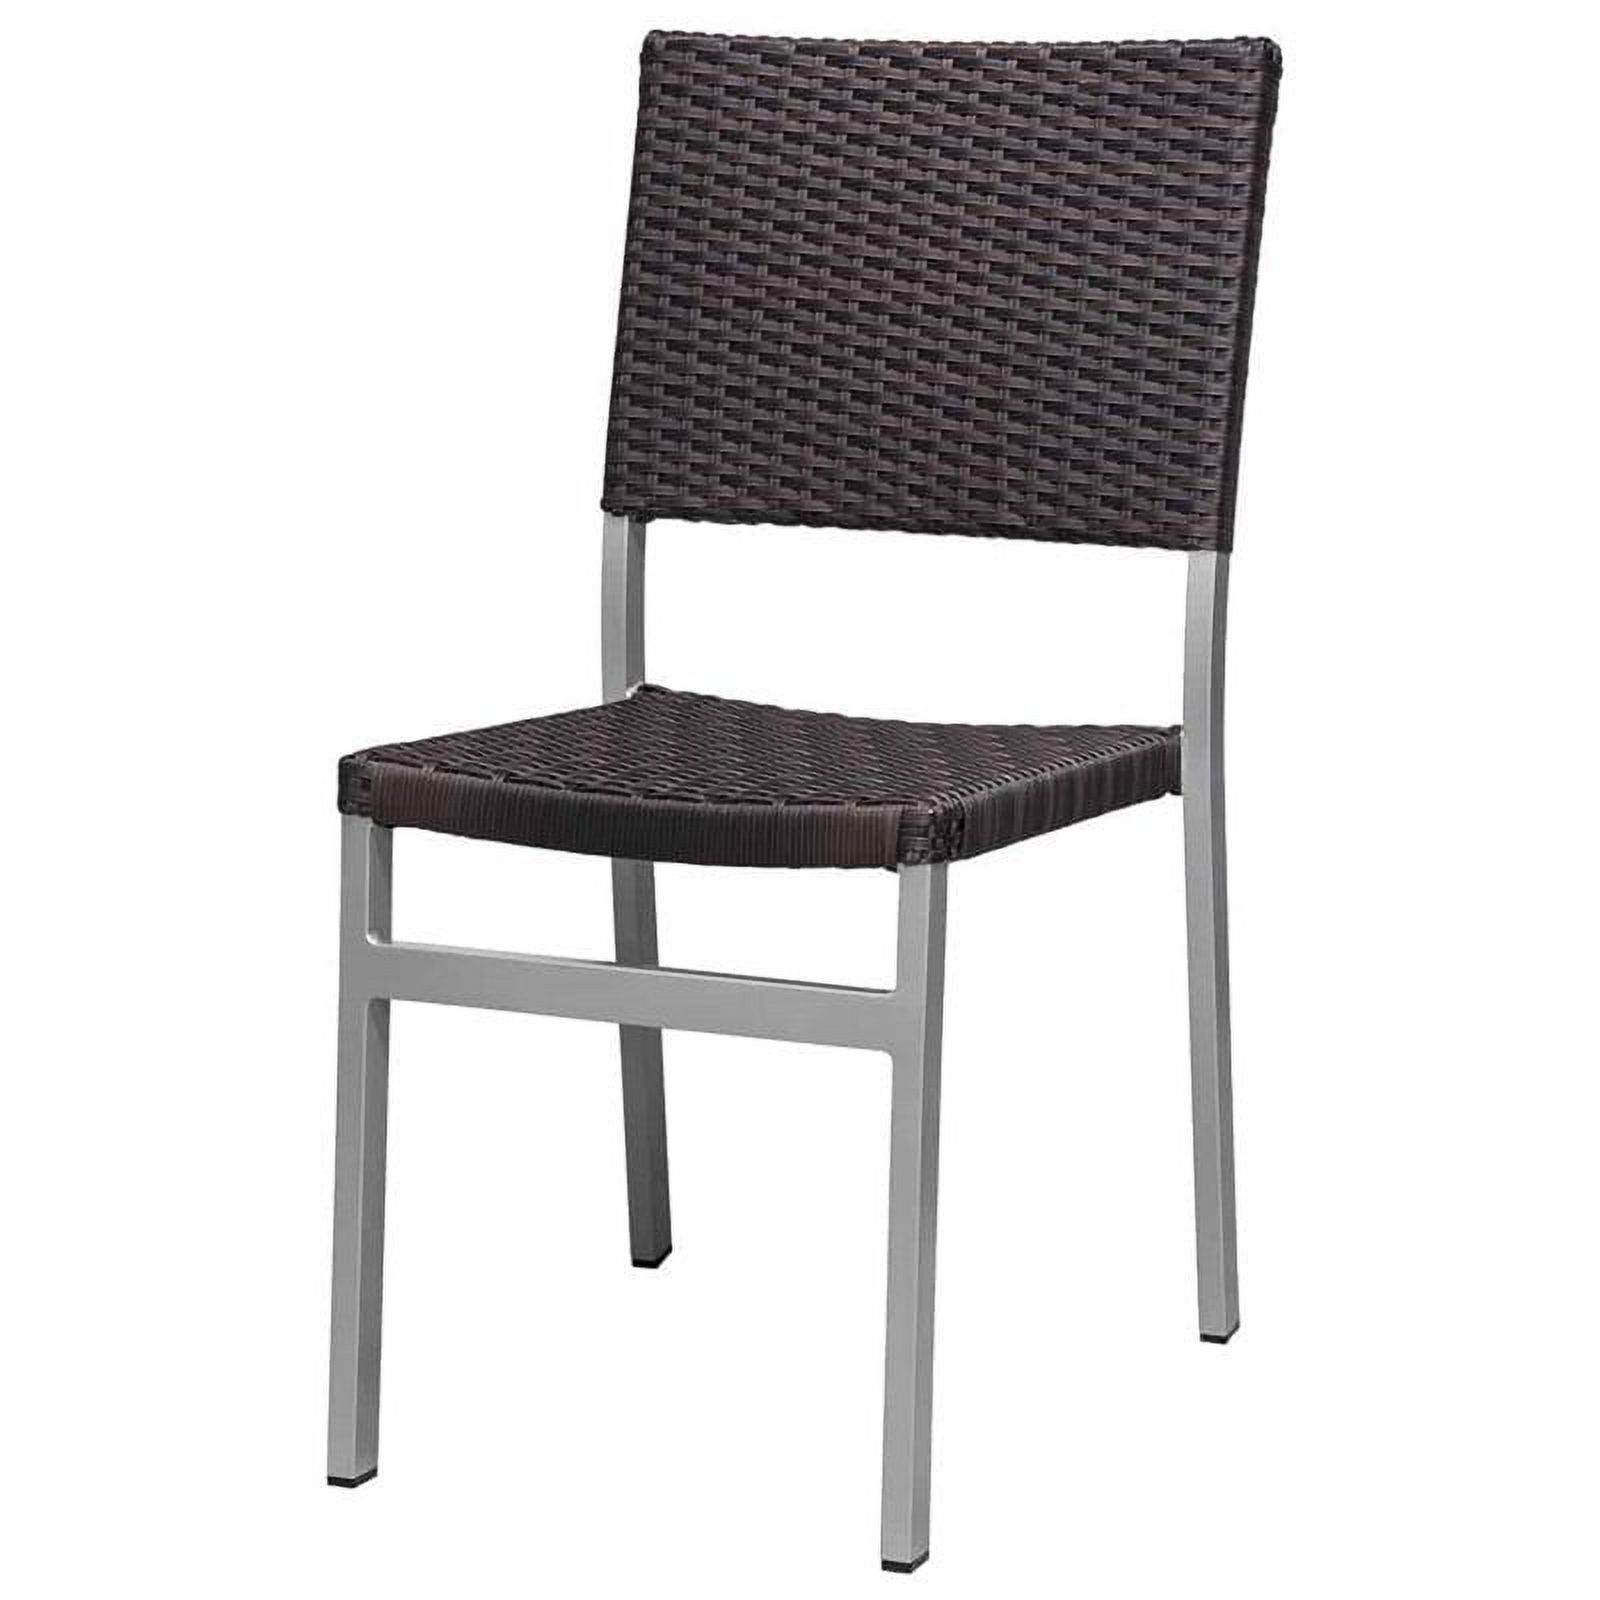 Source Furniture Fiji Wicker Patio Dining Side Armless Chair in Espresso - image 1 of 1